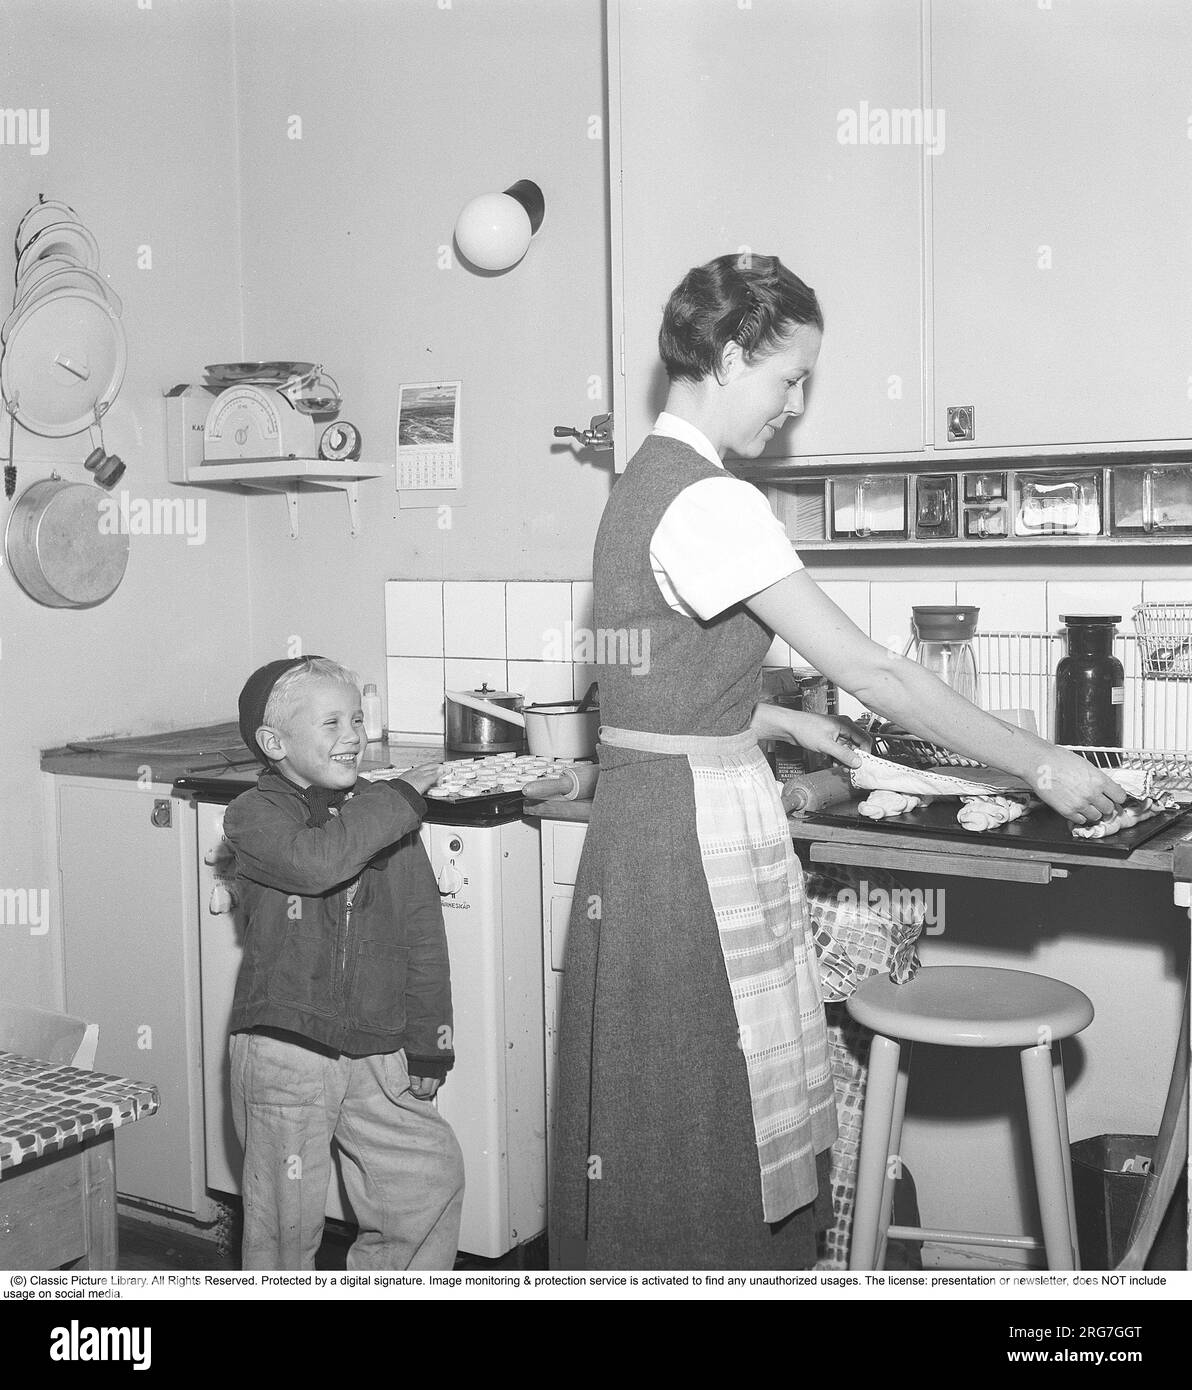 Baking in the 1950s. A mother with her son in the kitchen. She is baking sweet bread and buns. An already baked plate of cookis is tempting and the boy reaches out to take one when his mother looks the other way. Sweden 1958 Kristoffersson ref BY20-2 Stock Photo